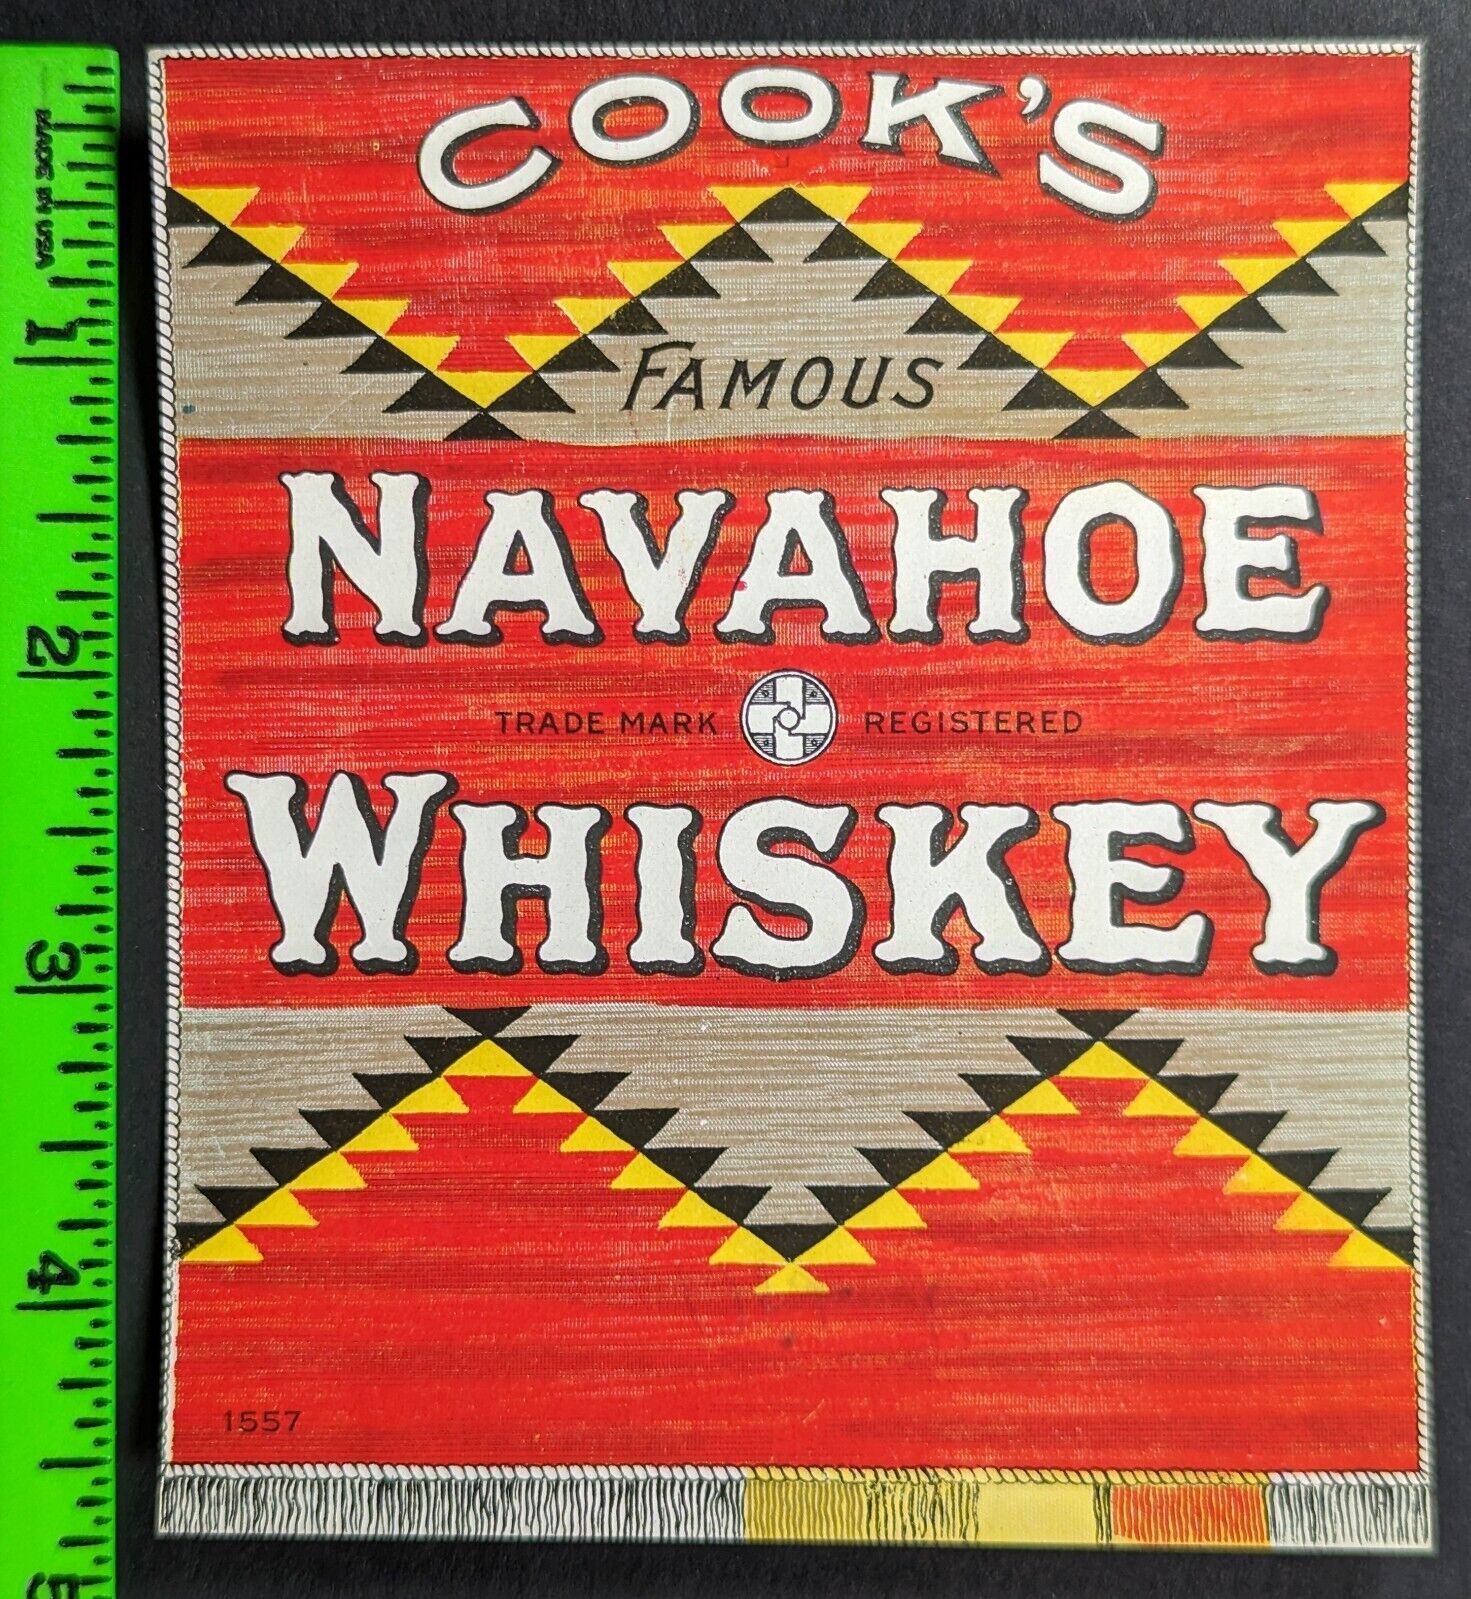 Vintage Cook's Navahoe Whiskey Alcohol Label